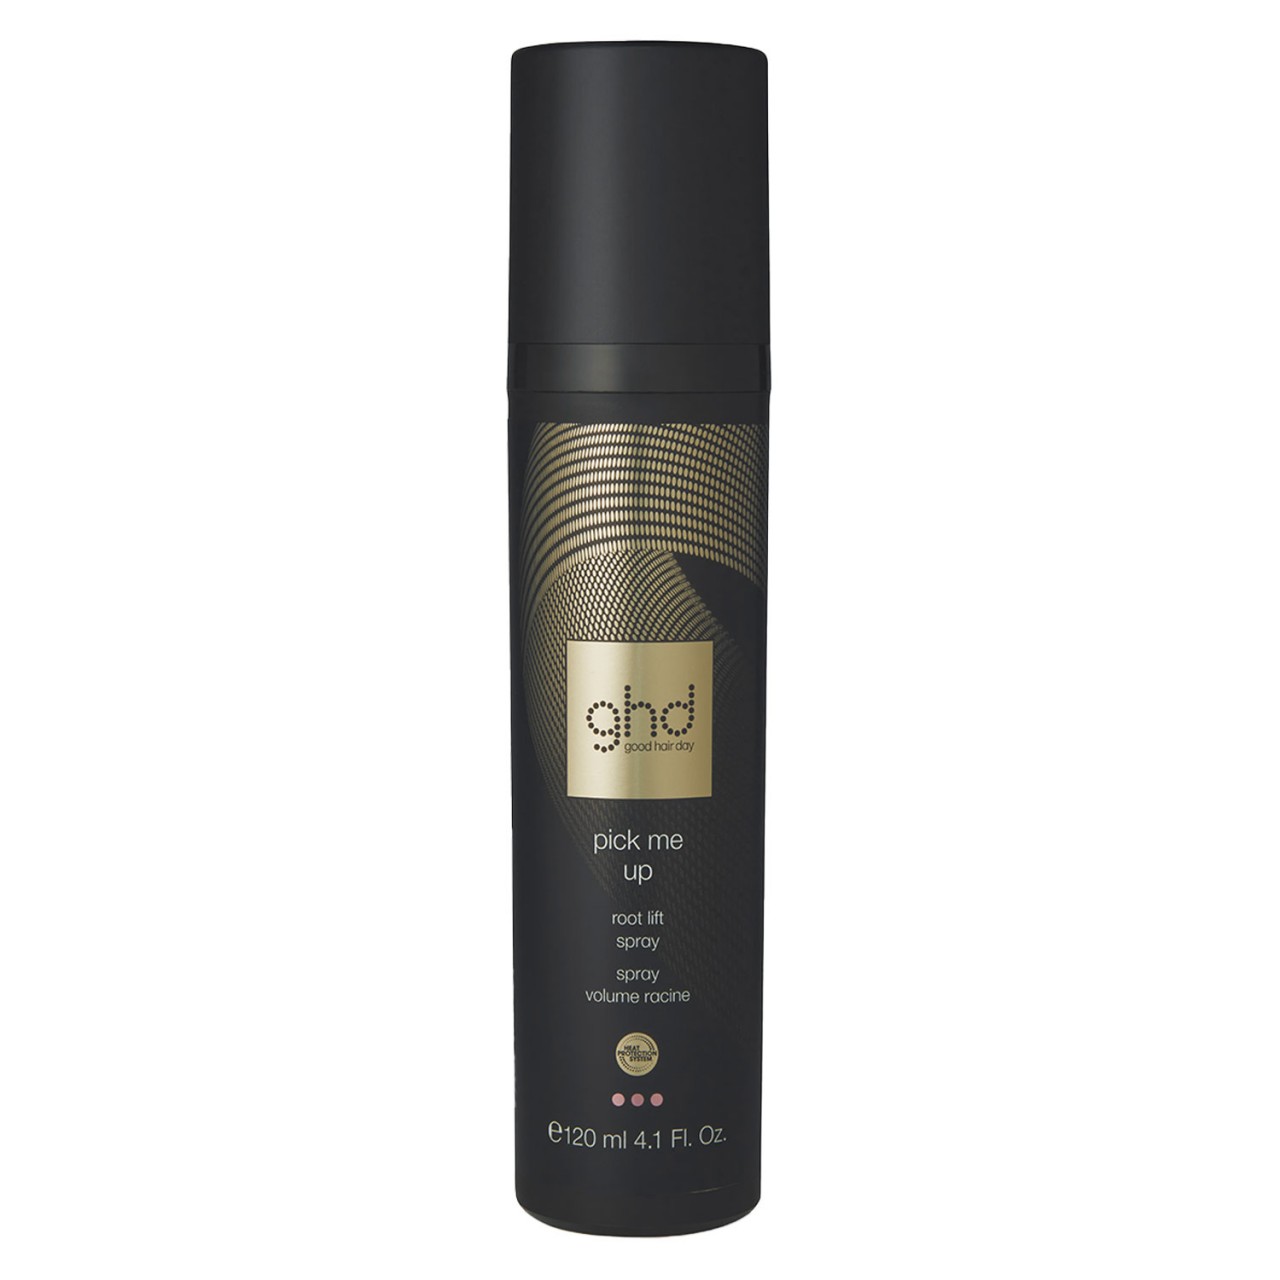 ghd Heat Protection Styling System - Pick Me Up Root Lift Spray von ghd